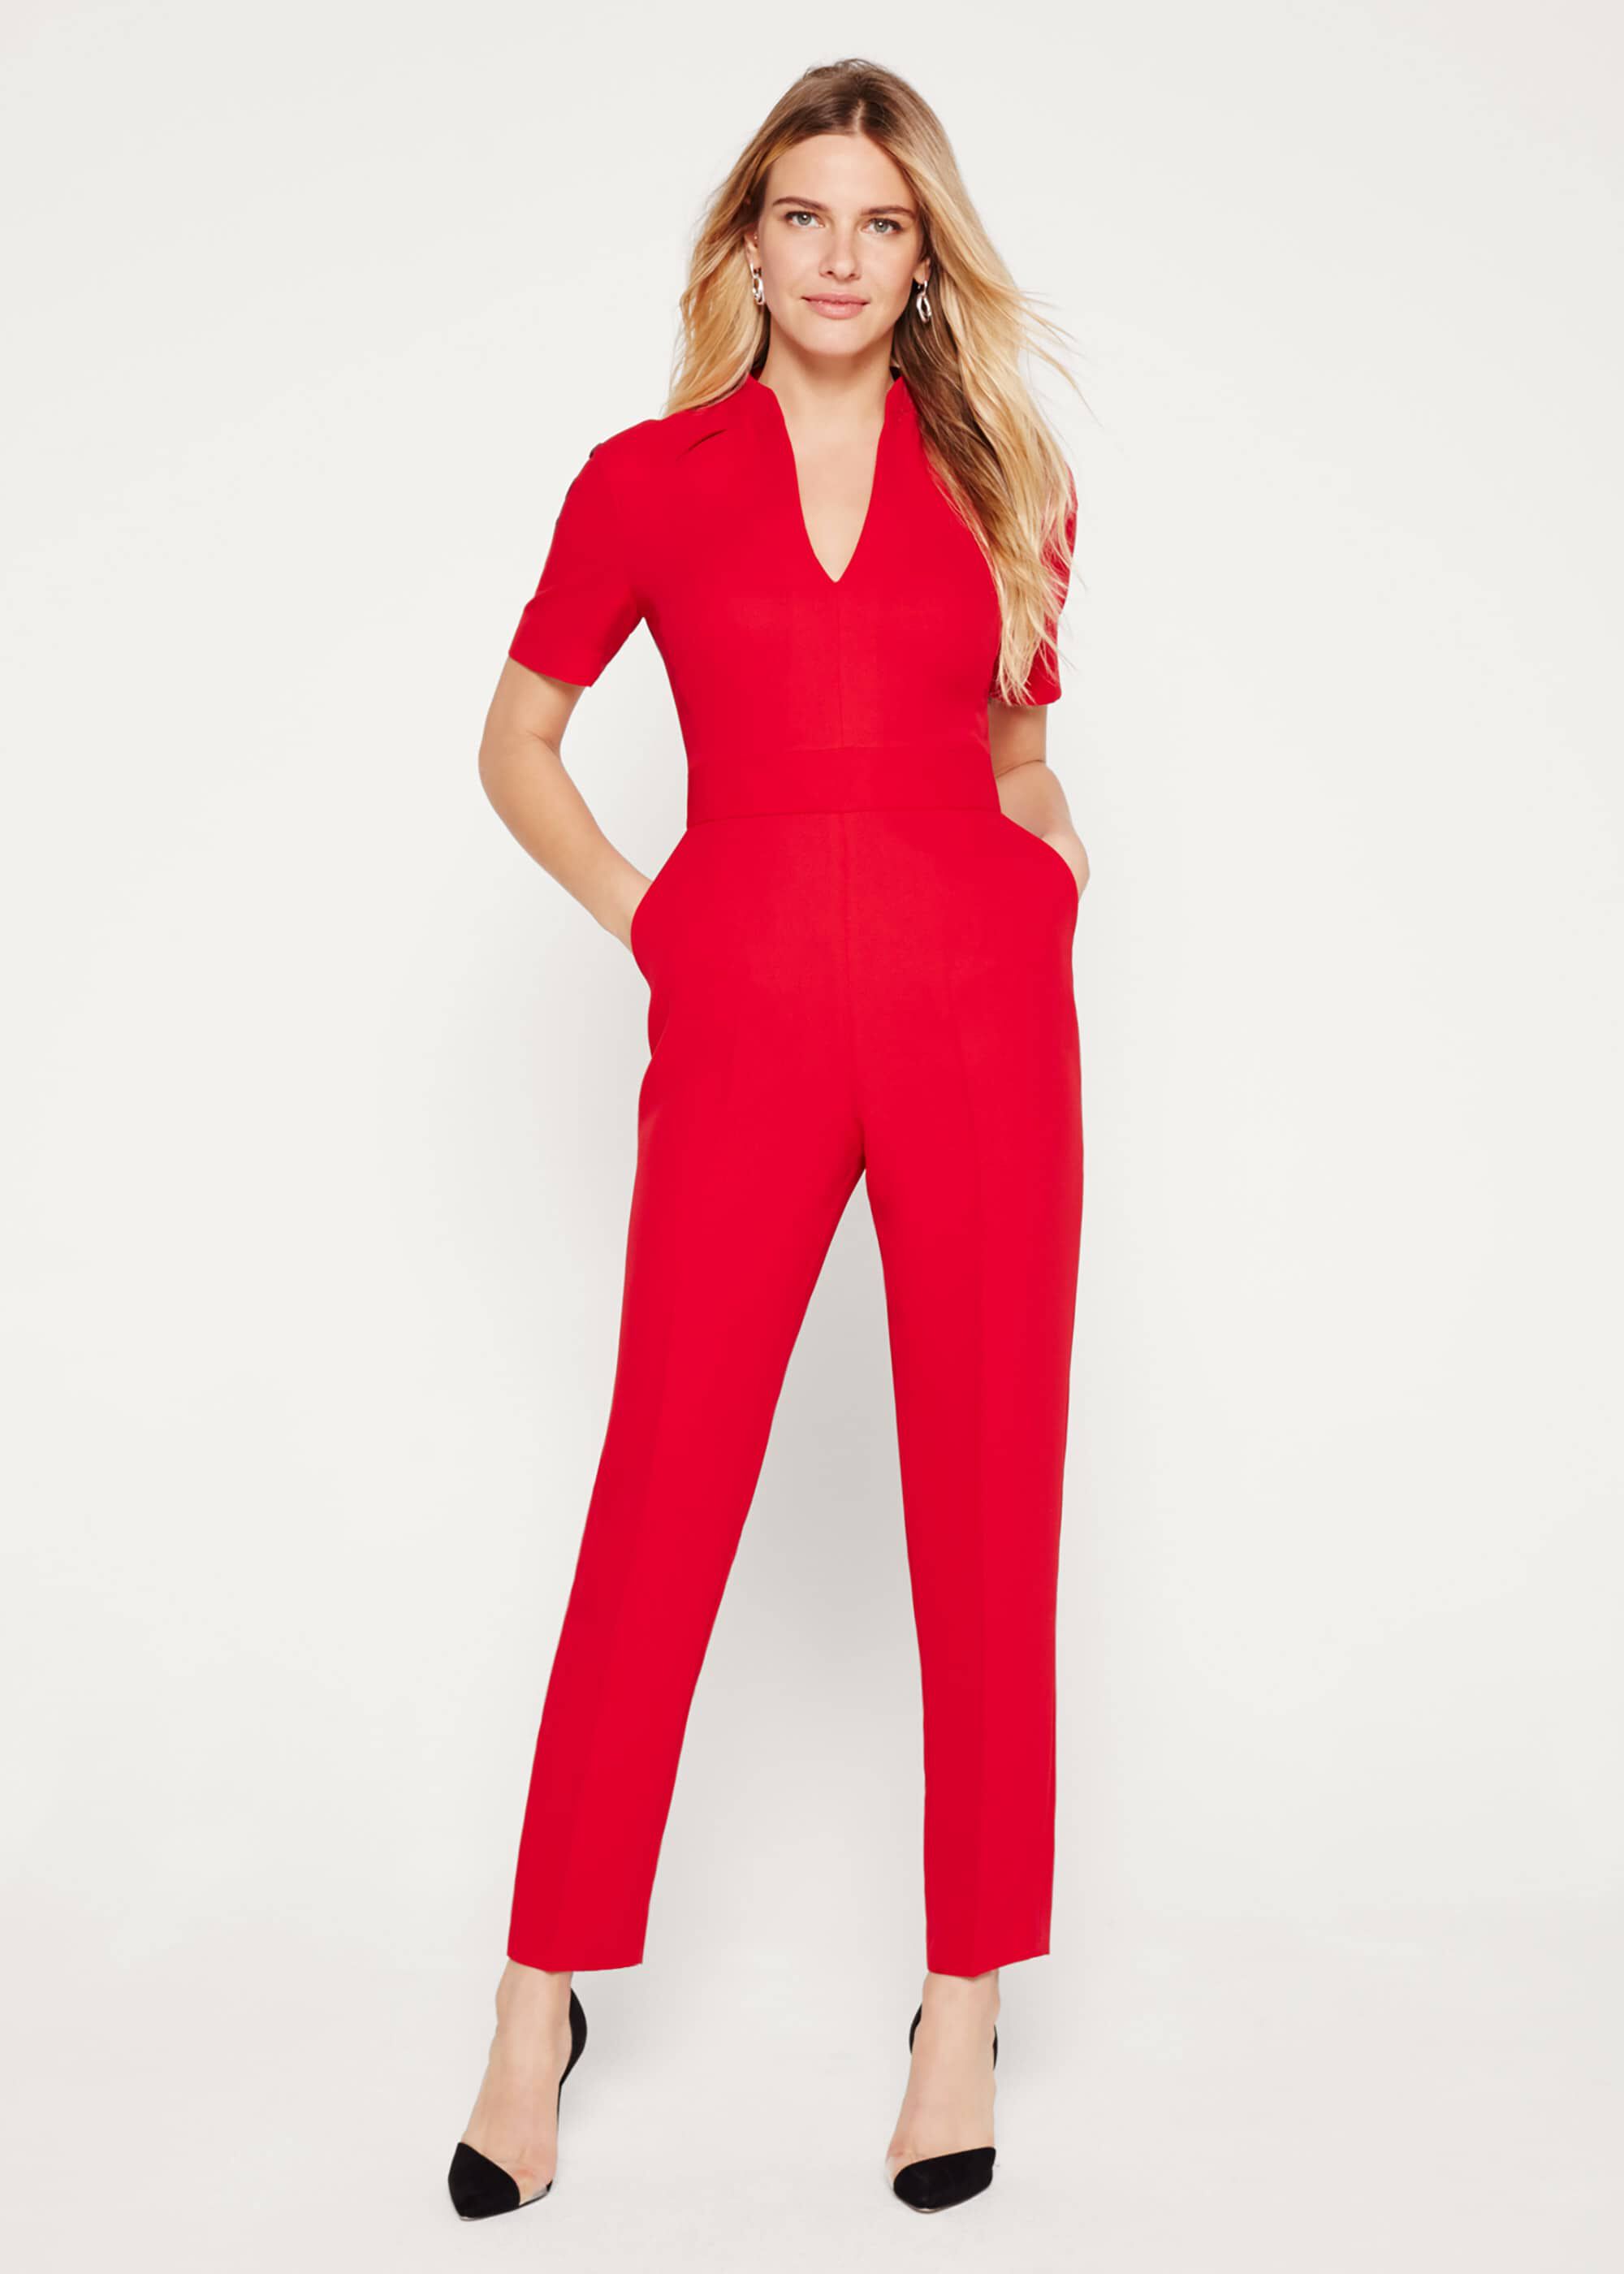 Phase Eight Jumpsuit Red Clearance, 51% OFF | lagence.tv